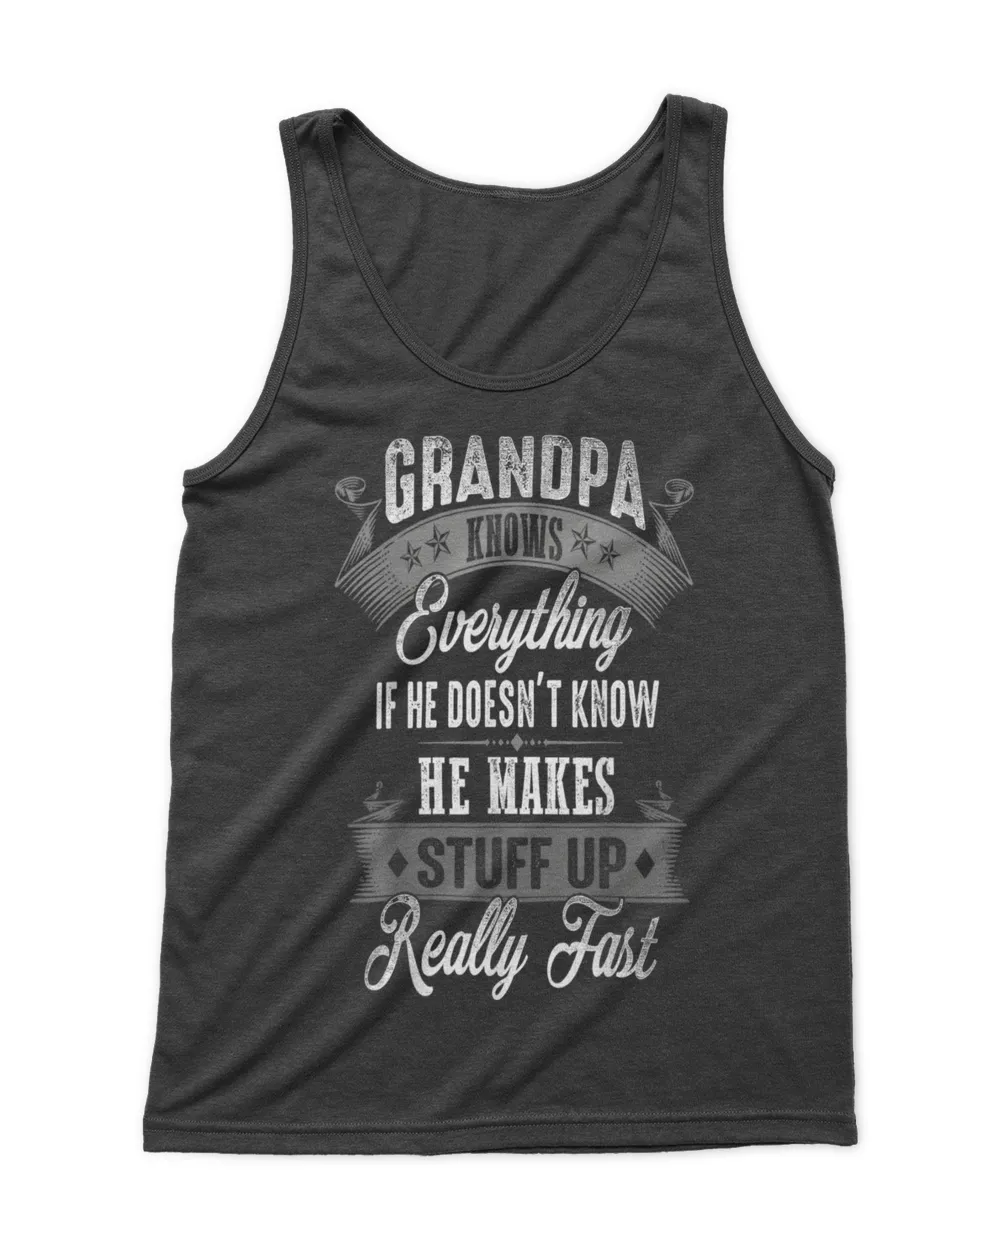 Mens Fathers Day shirt for Men Dad Grandpa Knows Everything Funny T-Shirt